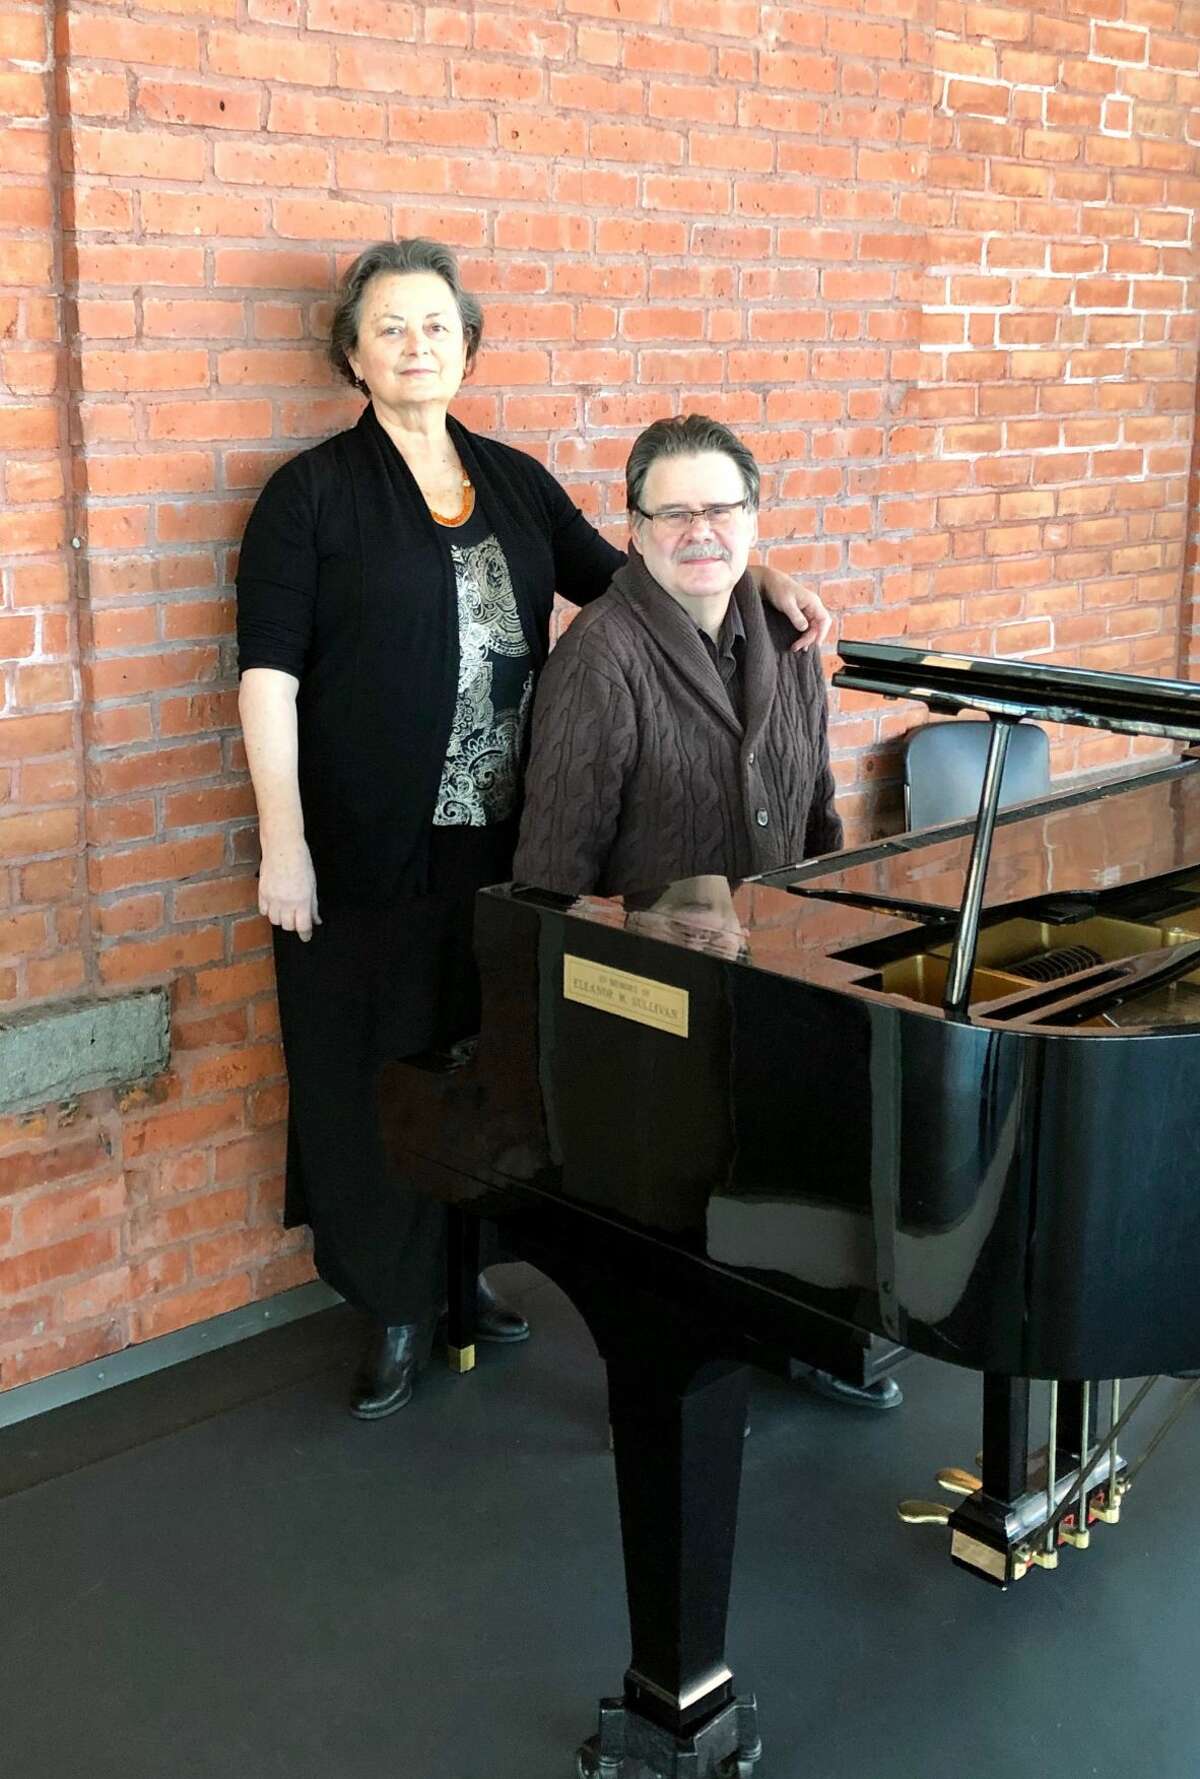 Denise Warner Limoli and Michael Limoli pose at a studio piano at the Nutmeg Conservatory for the Arts.